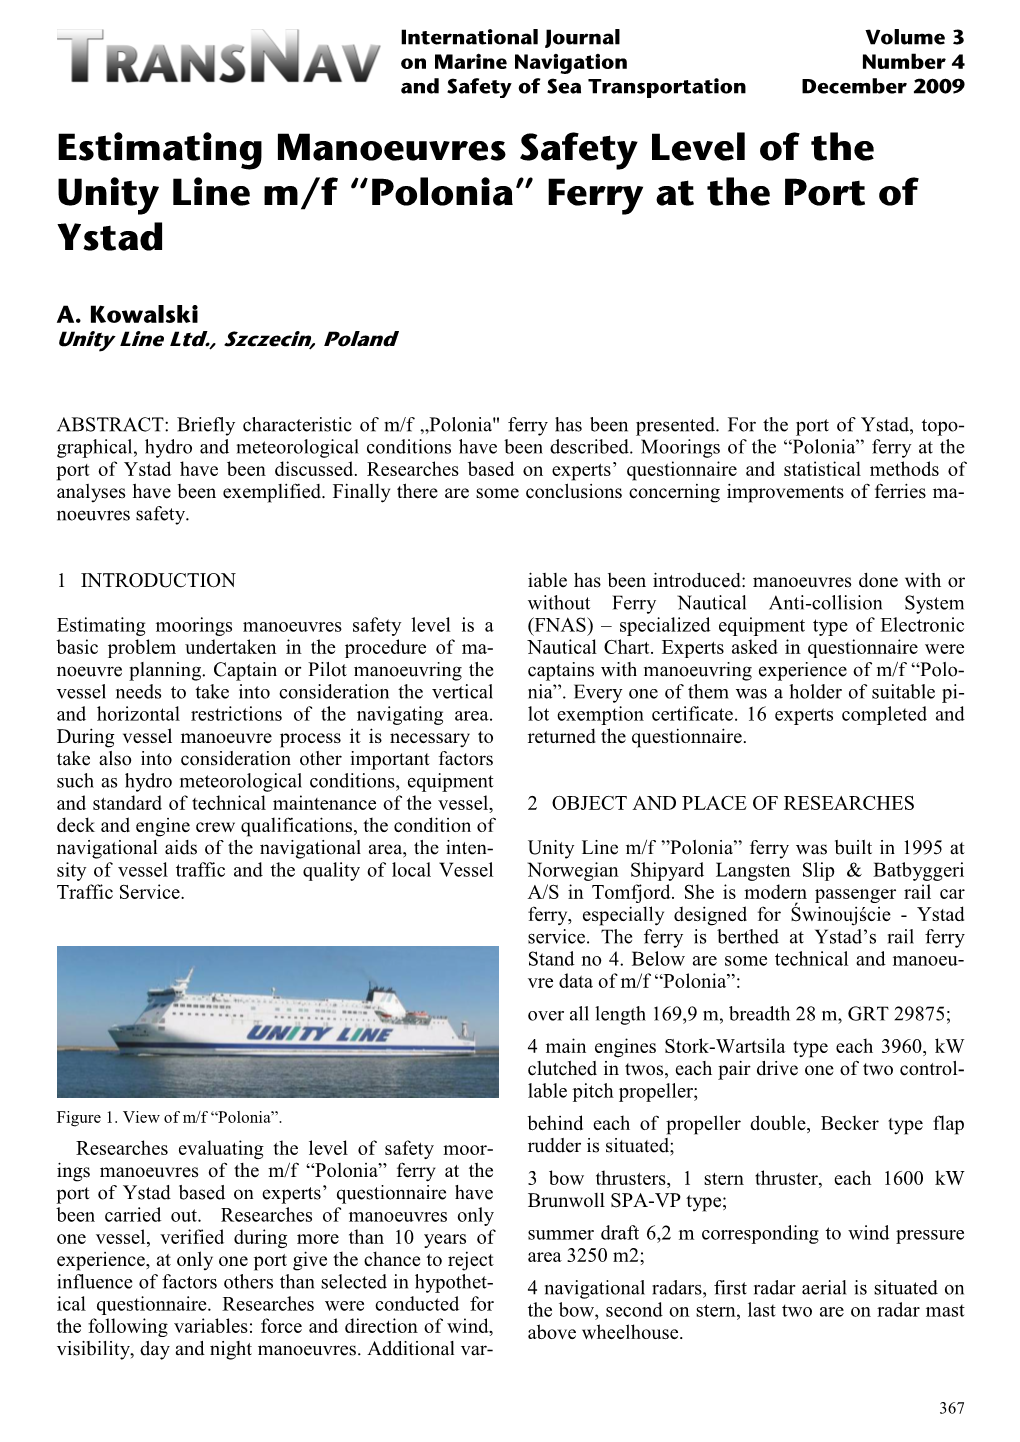 Estimating Manoeuvres Safety Level of the Unity Line M/F “Polonia” Ferry at the Port of Ystad